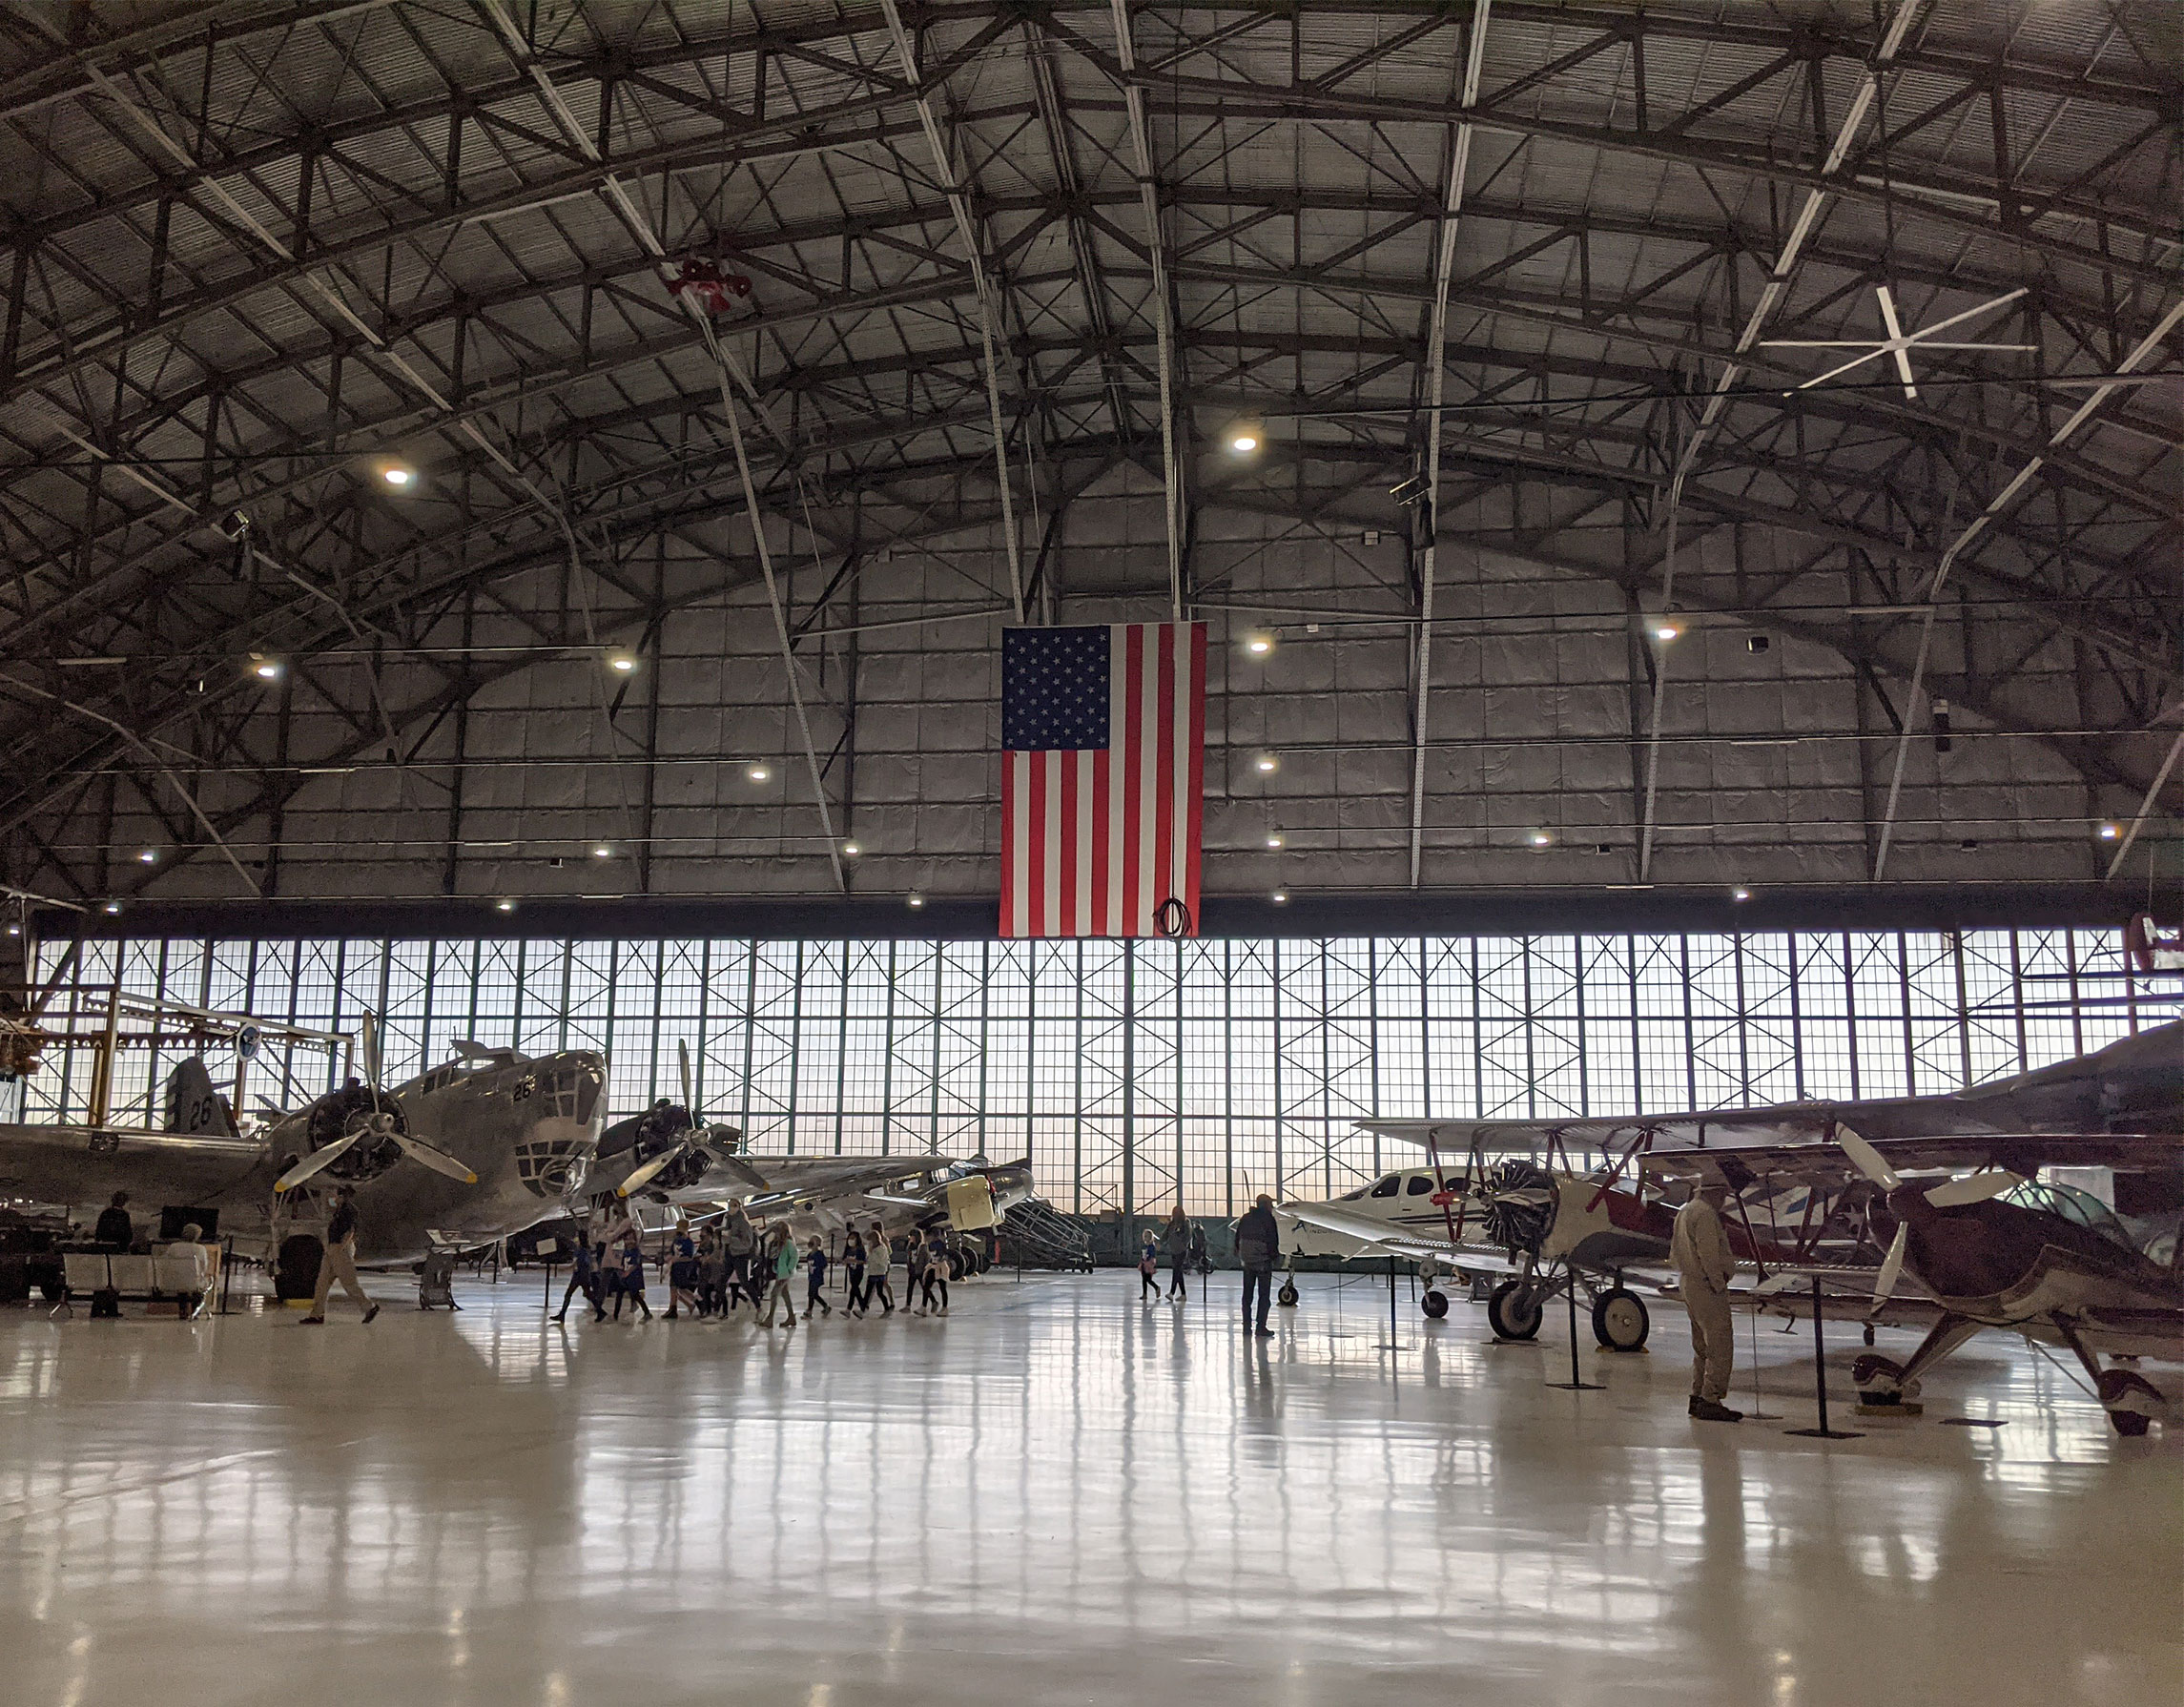 Airplanes in the hangar